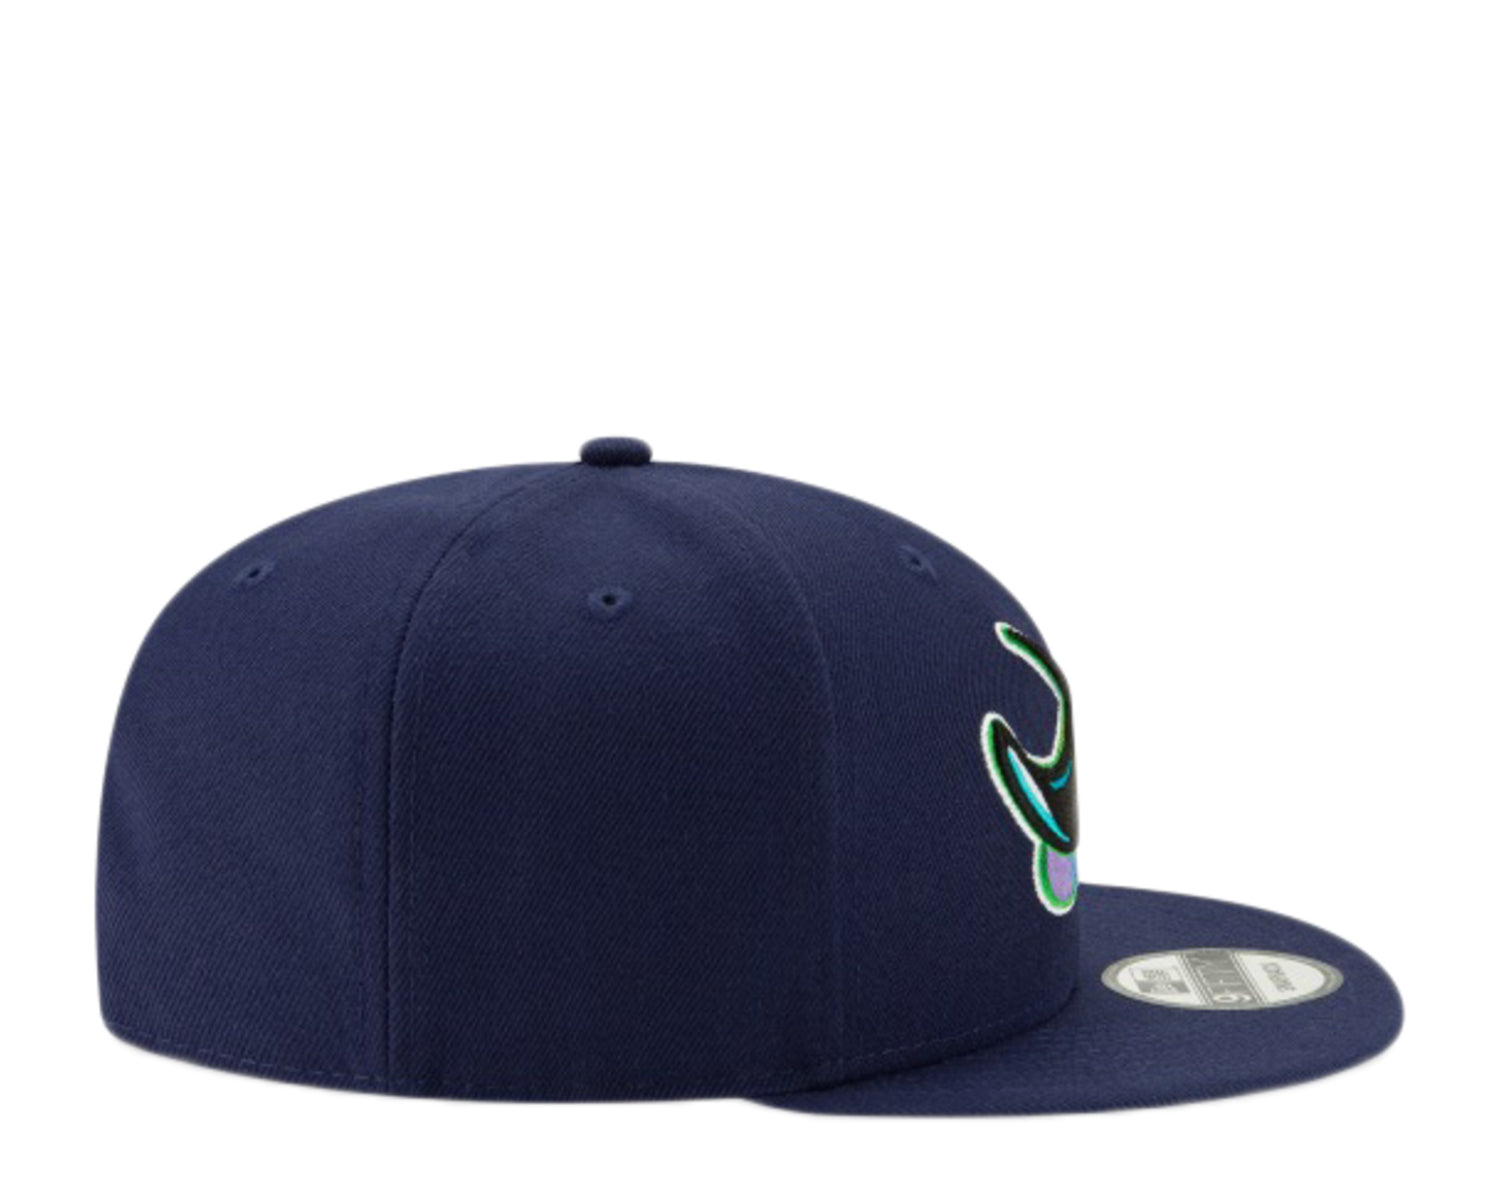 New Era 9Fifty MLB Tampa Bay Rays 1998 Cooperstown Basic Snapback Hat